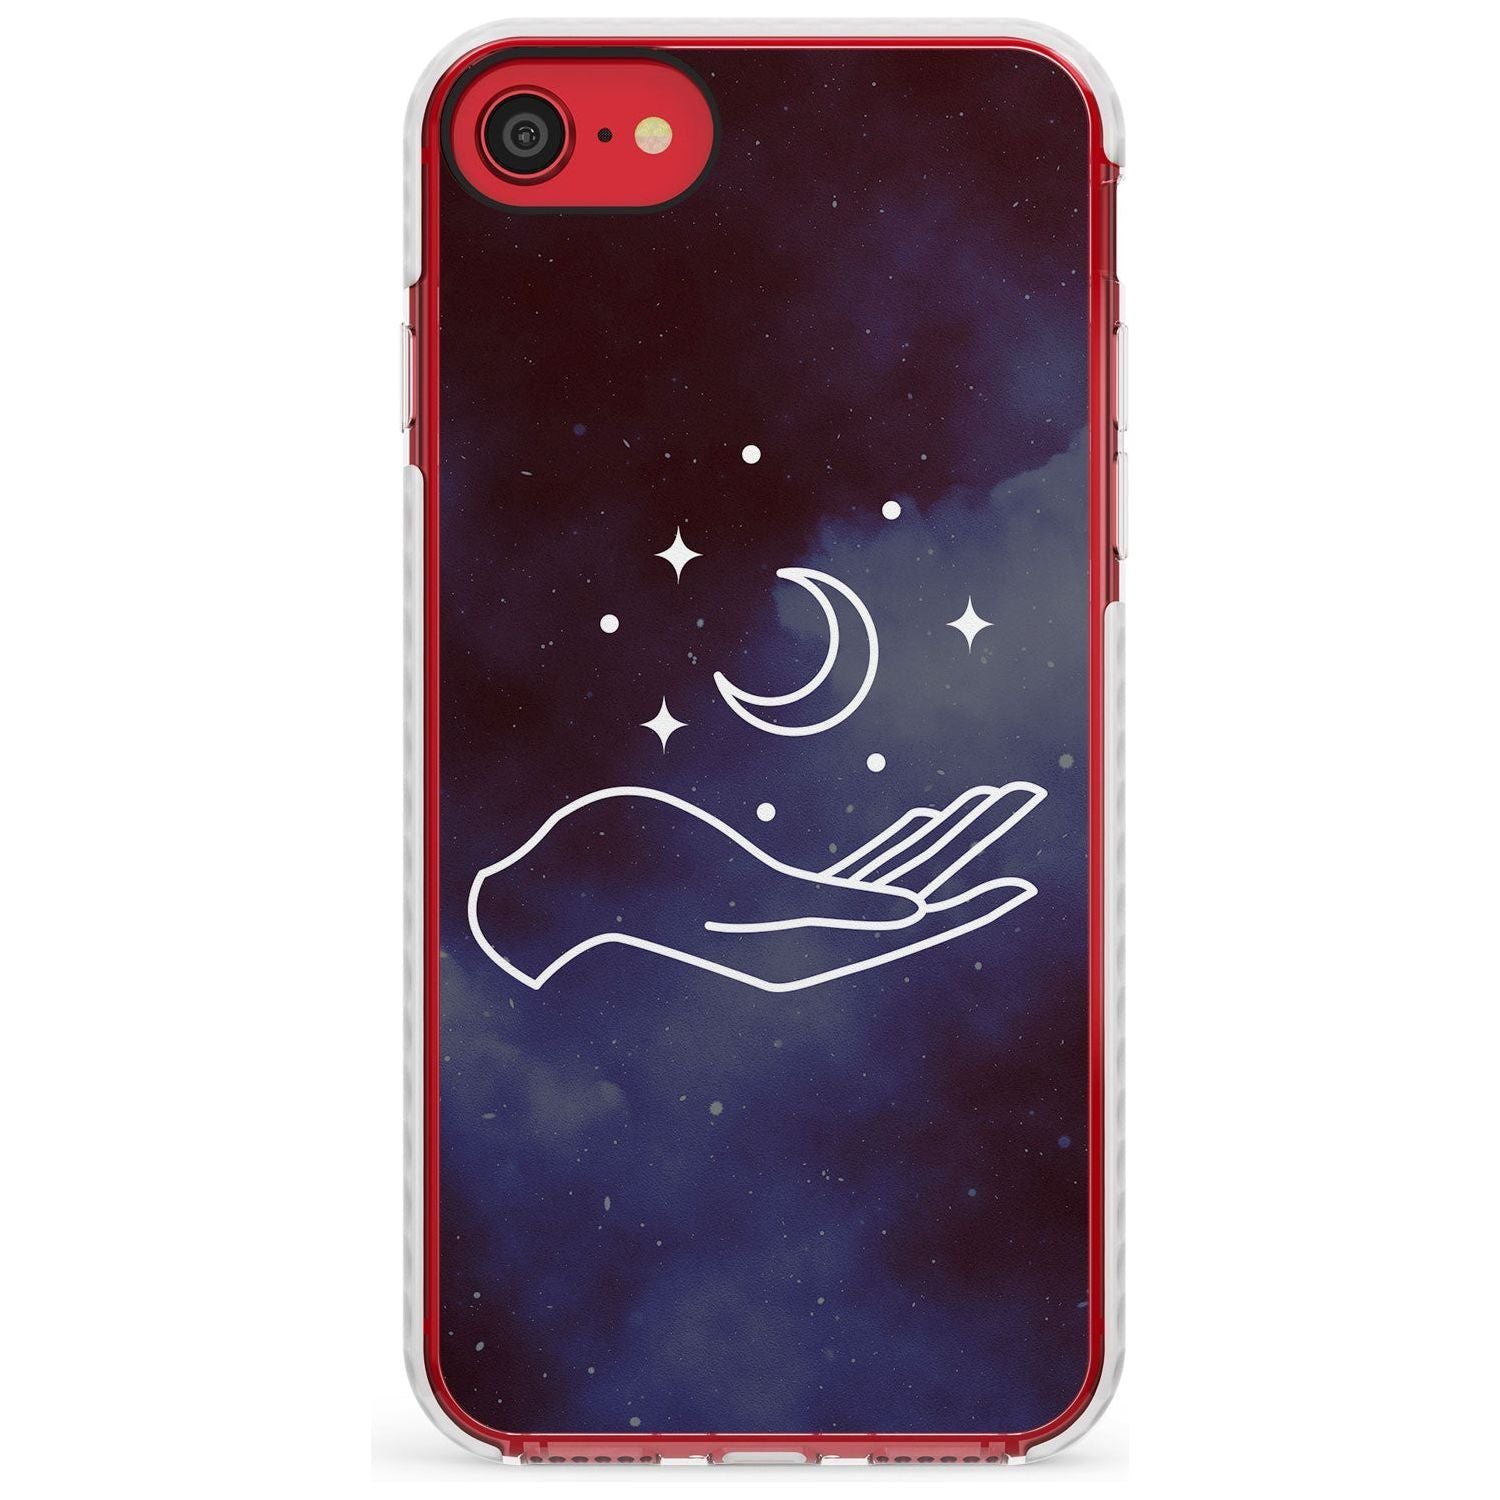 Floating Moon Above Hand Slim TPU Phone Case for iPhone SE 8 7 Plus